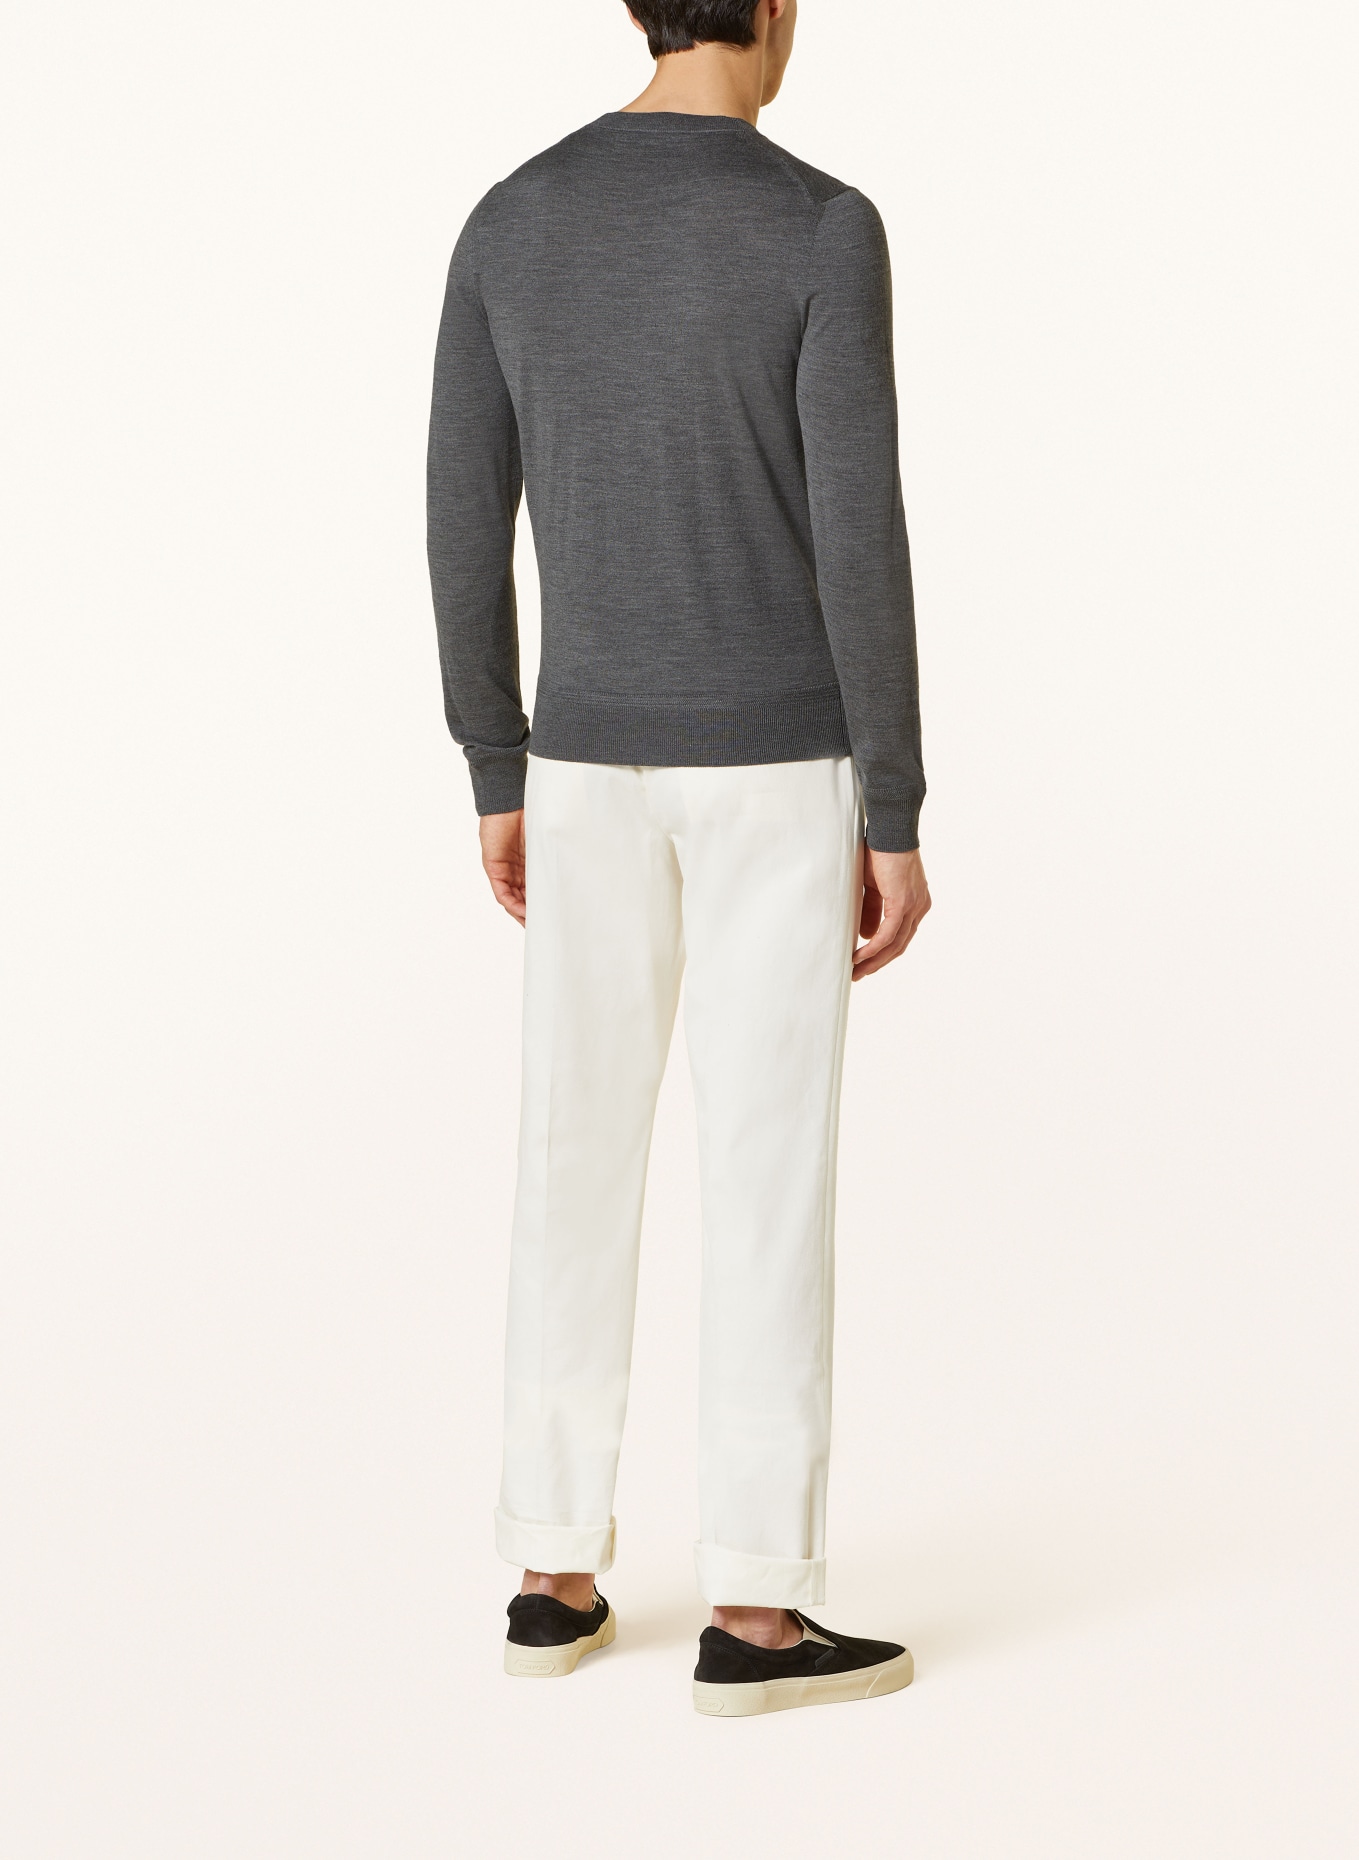 TOM FORD Sweater , Color: DARK GRAY (Image 3)